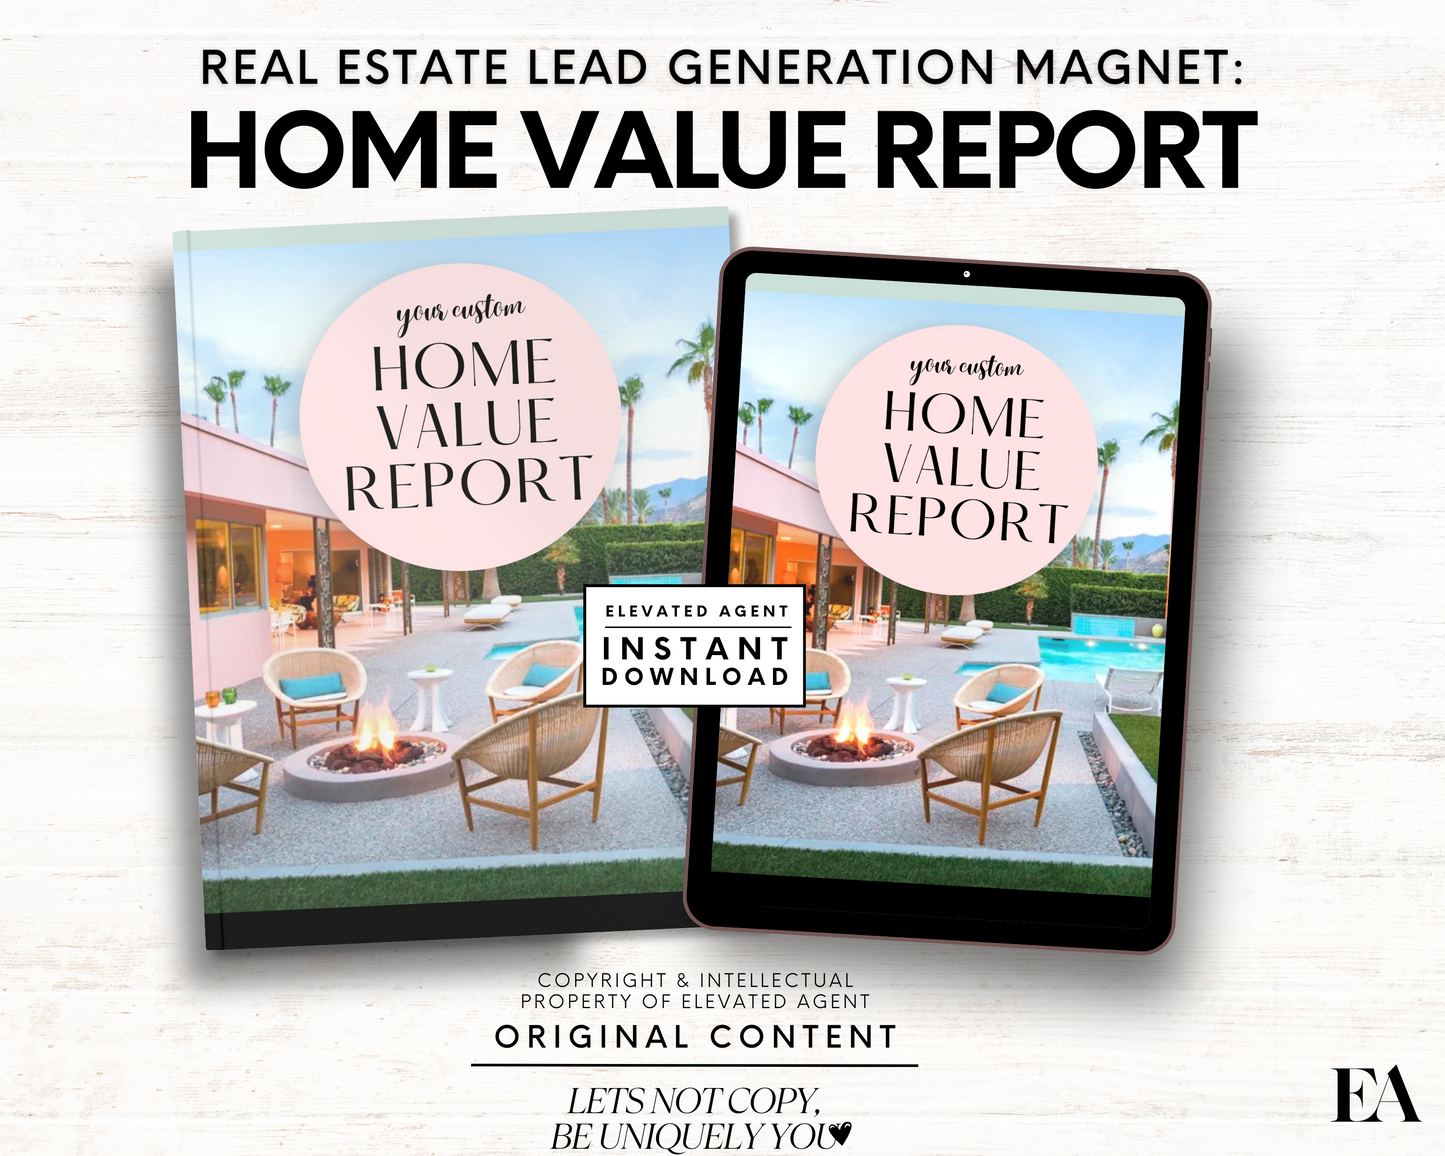 Real Estate CMA, Home Value Report, Playful